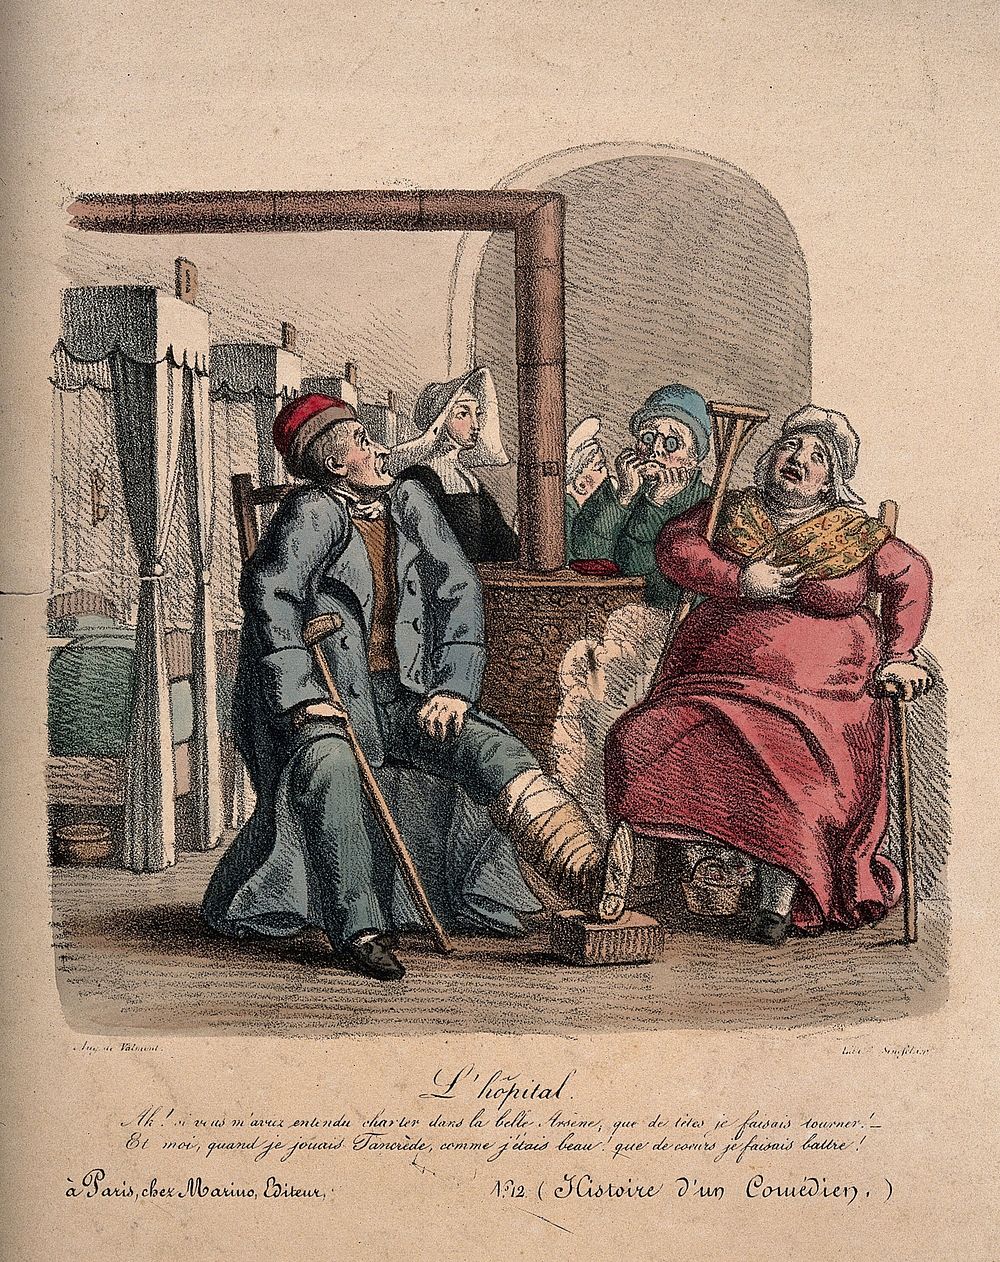 Some elderly patients wistfully reminisce about their younger days. Coloured lithograph by A. de Valmont.